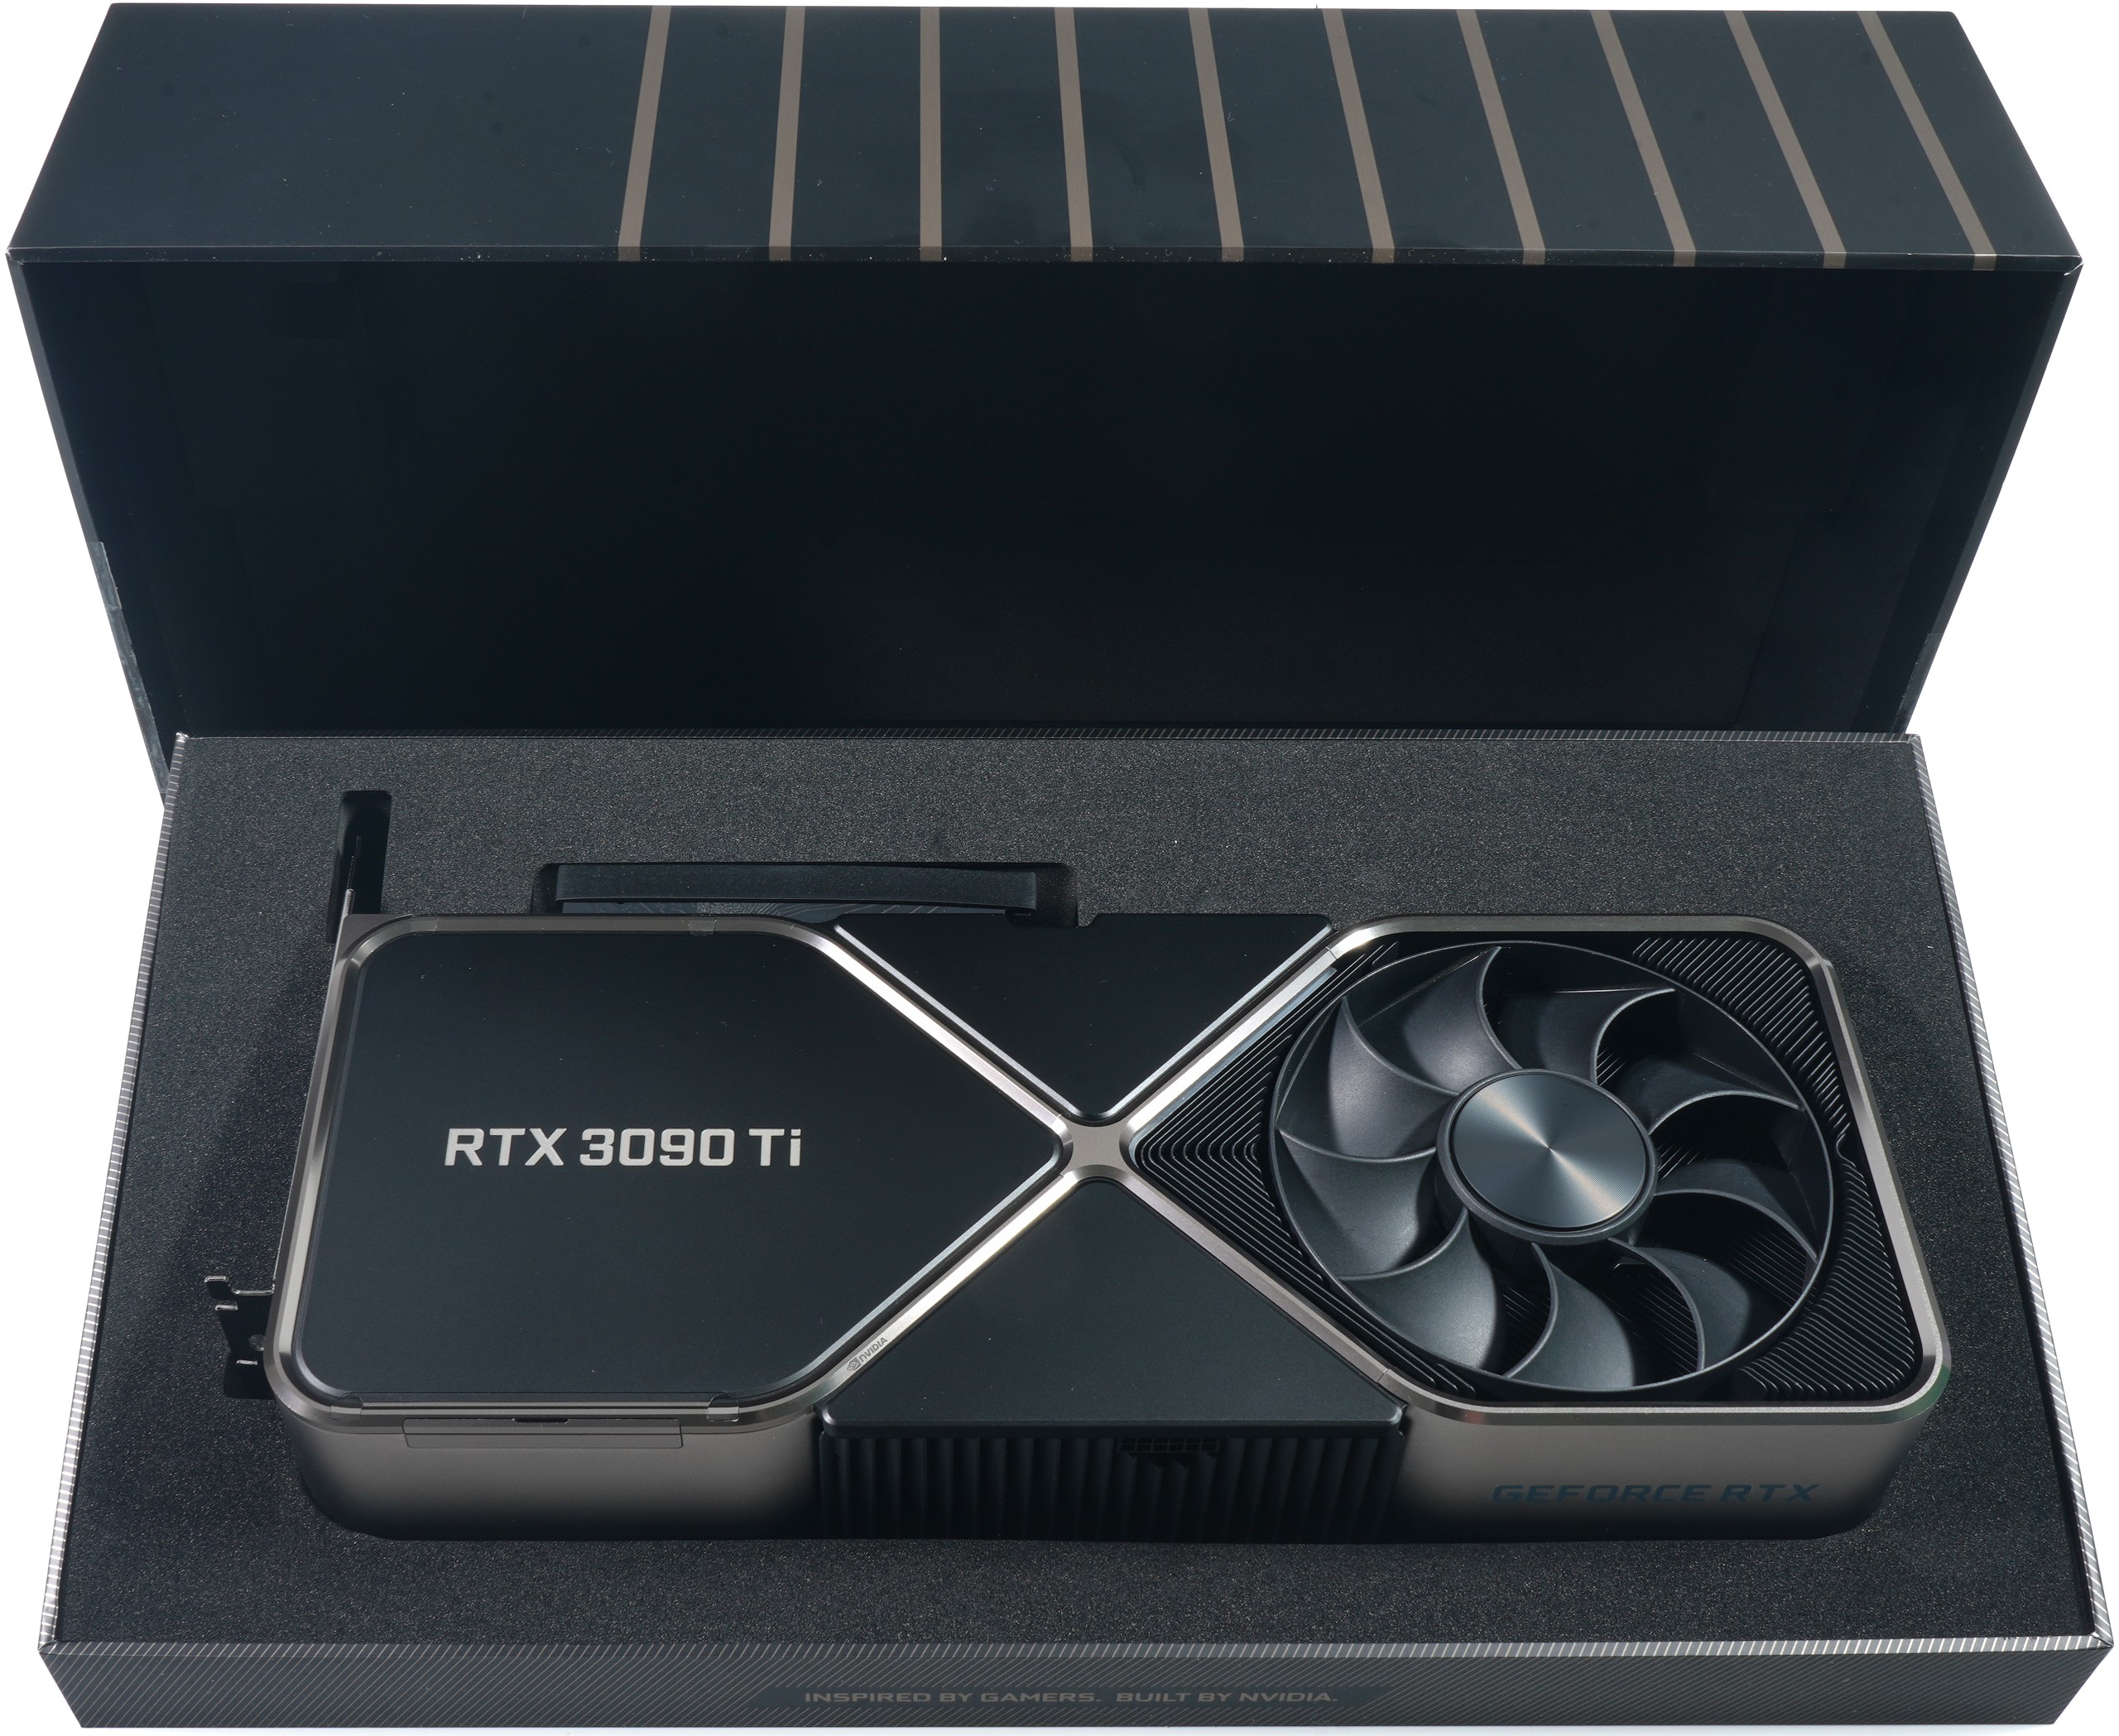 NVIDIA GeForce RTX 3090 Ti FE in a Studio PC and a Workstation - Showdown against a RTX A6000 and limited to 300 Watts